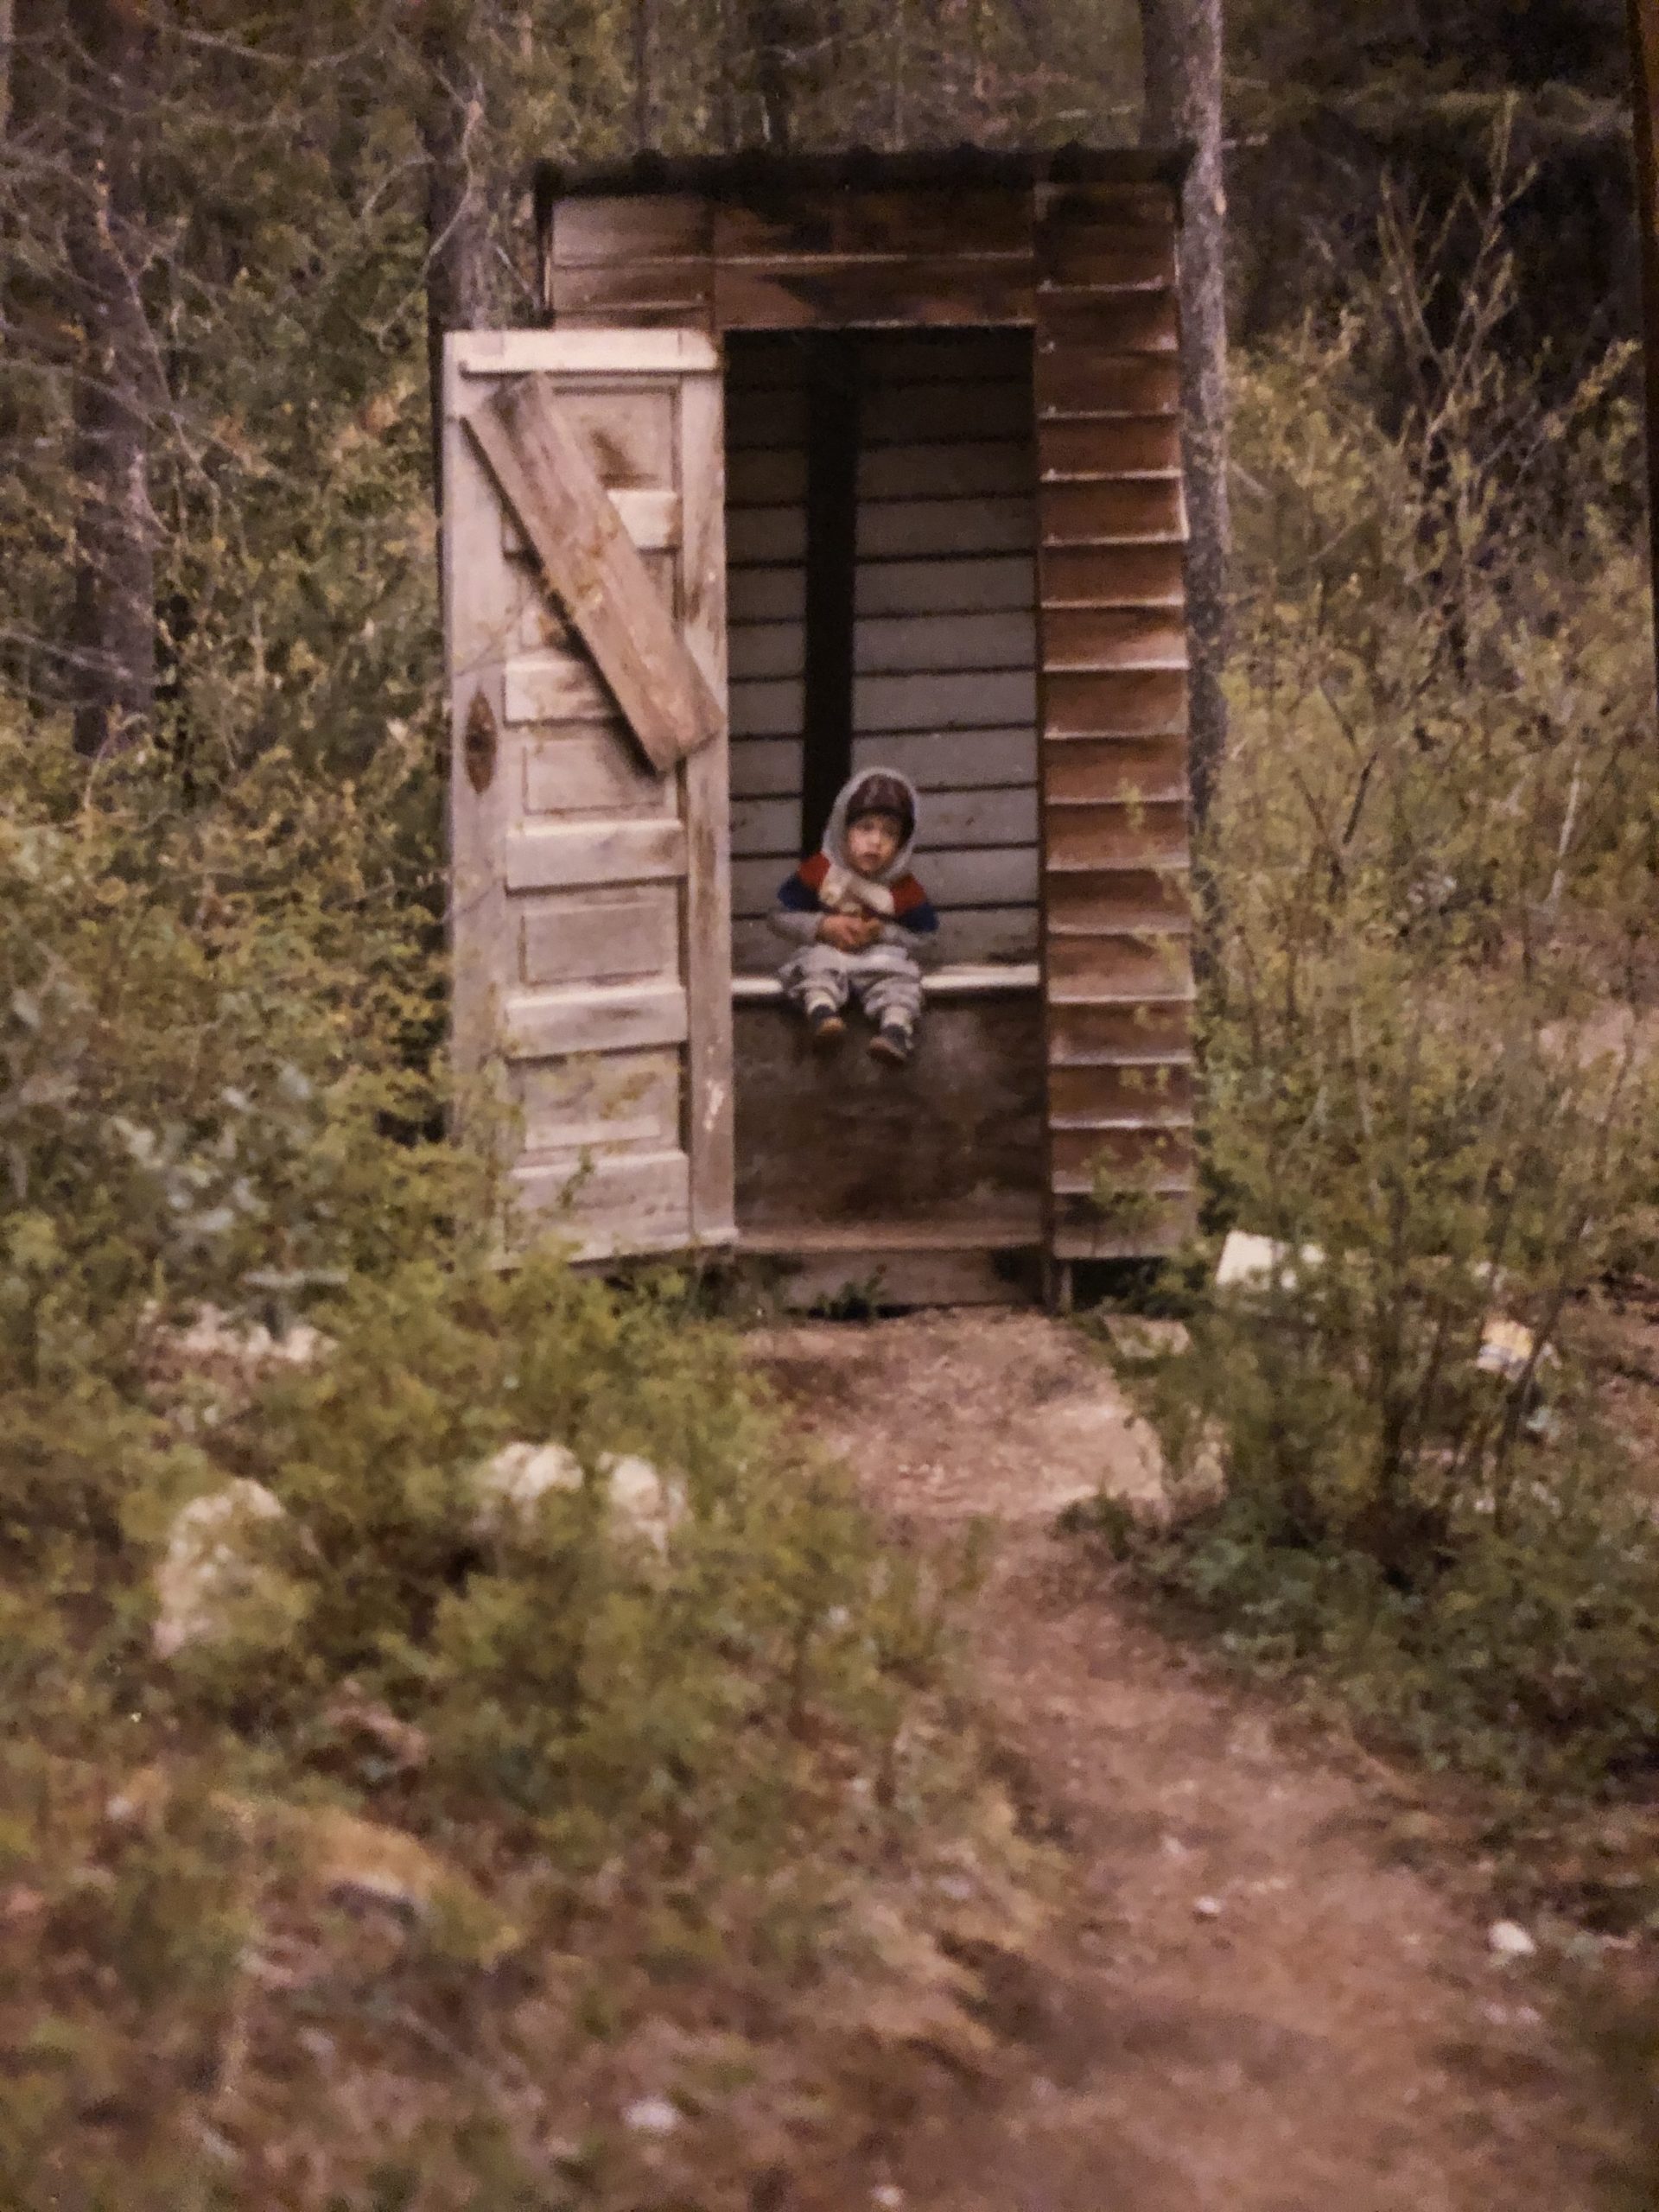 outhouse in the woods